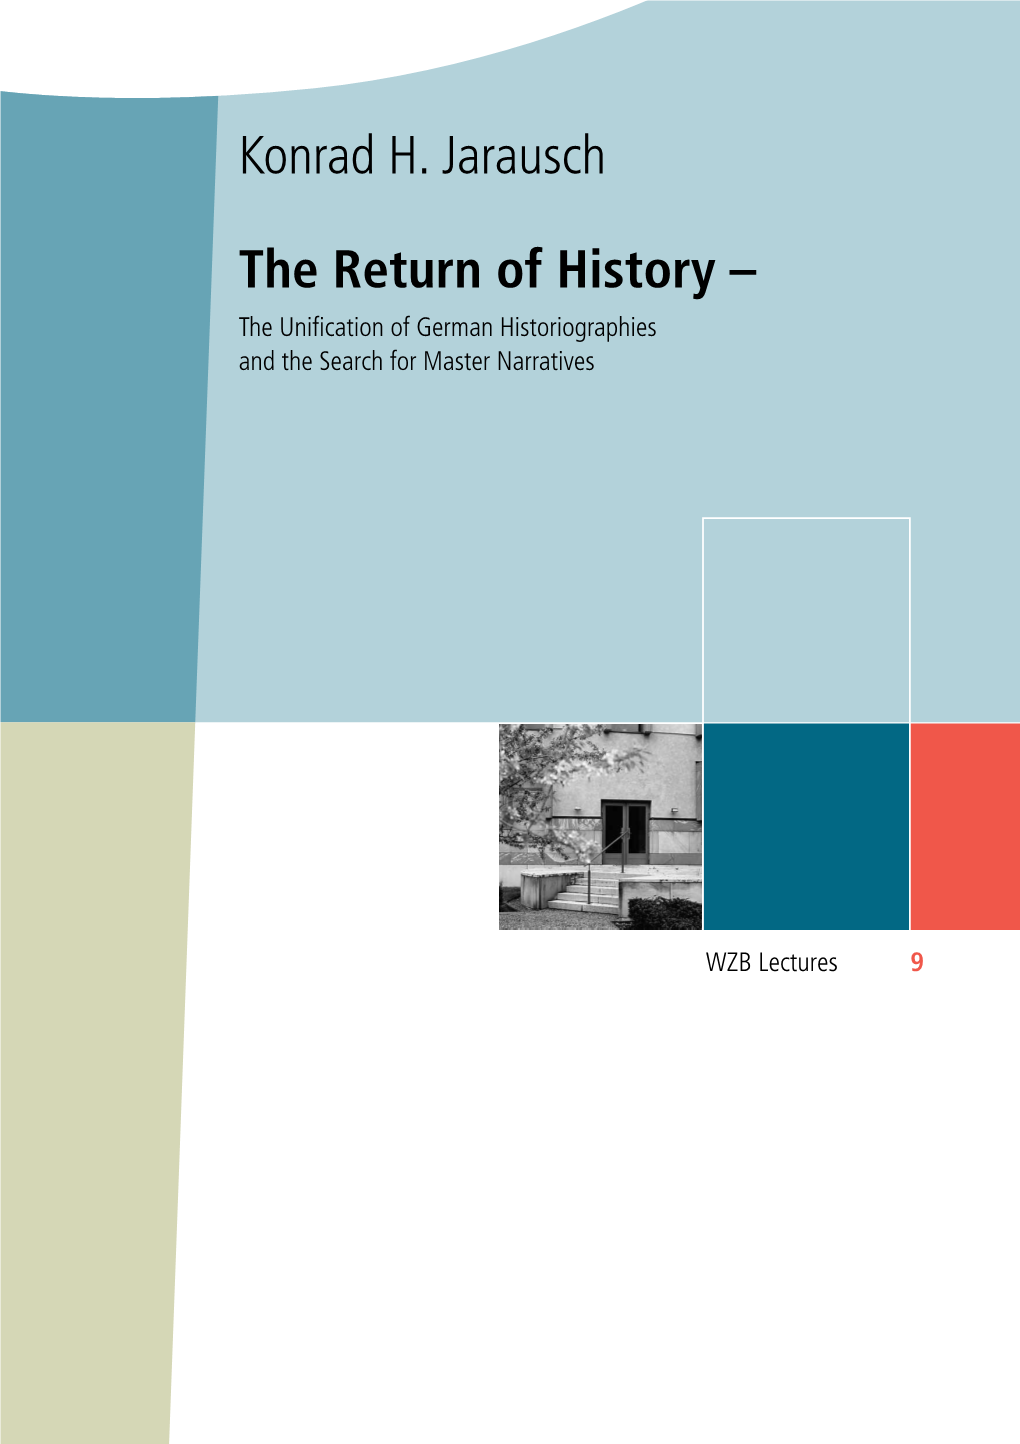 The Return of History – the Unification of German Historiographies and the Search for Master Narratives